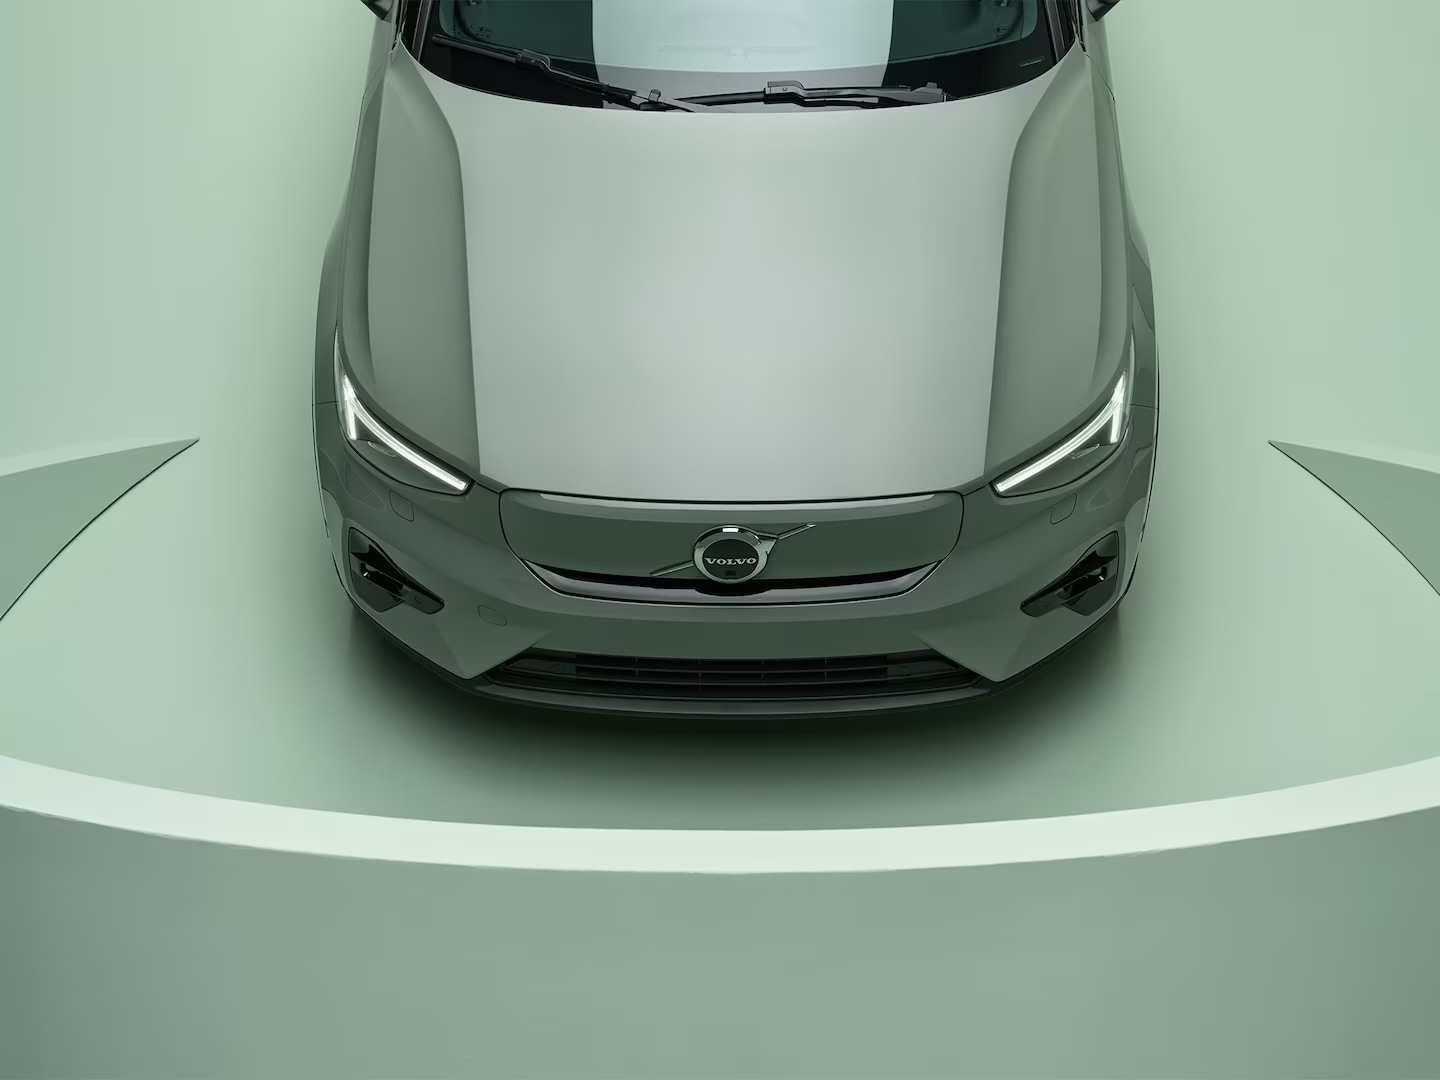 Sculpted bonnet and sleek LED headlamps on the Volvo XC40 Recharge pure electric.